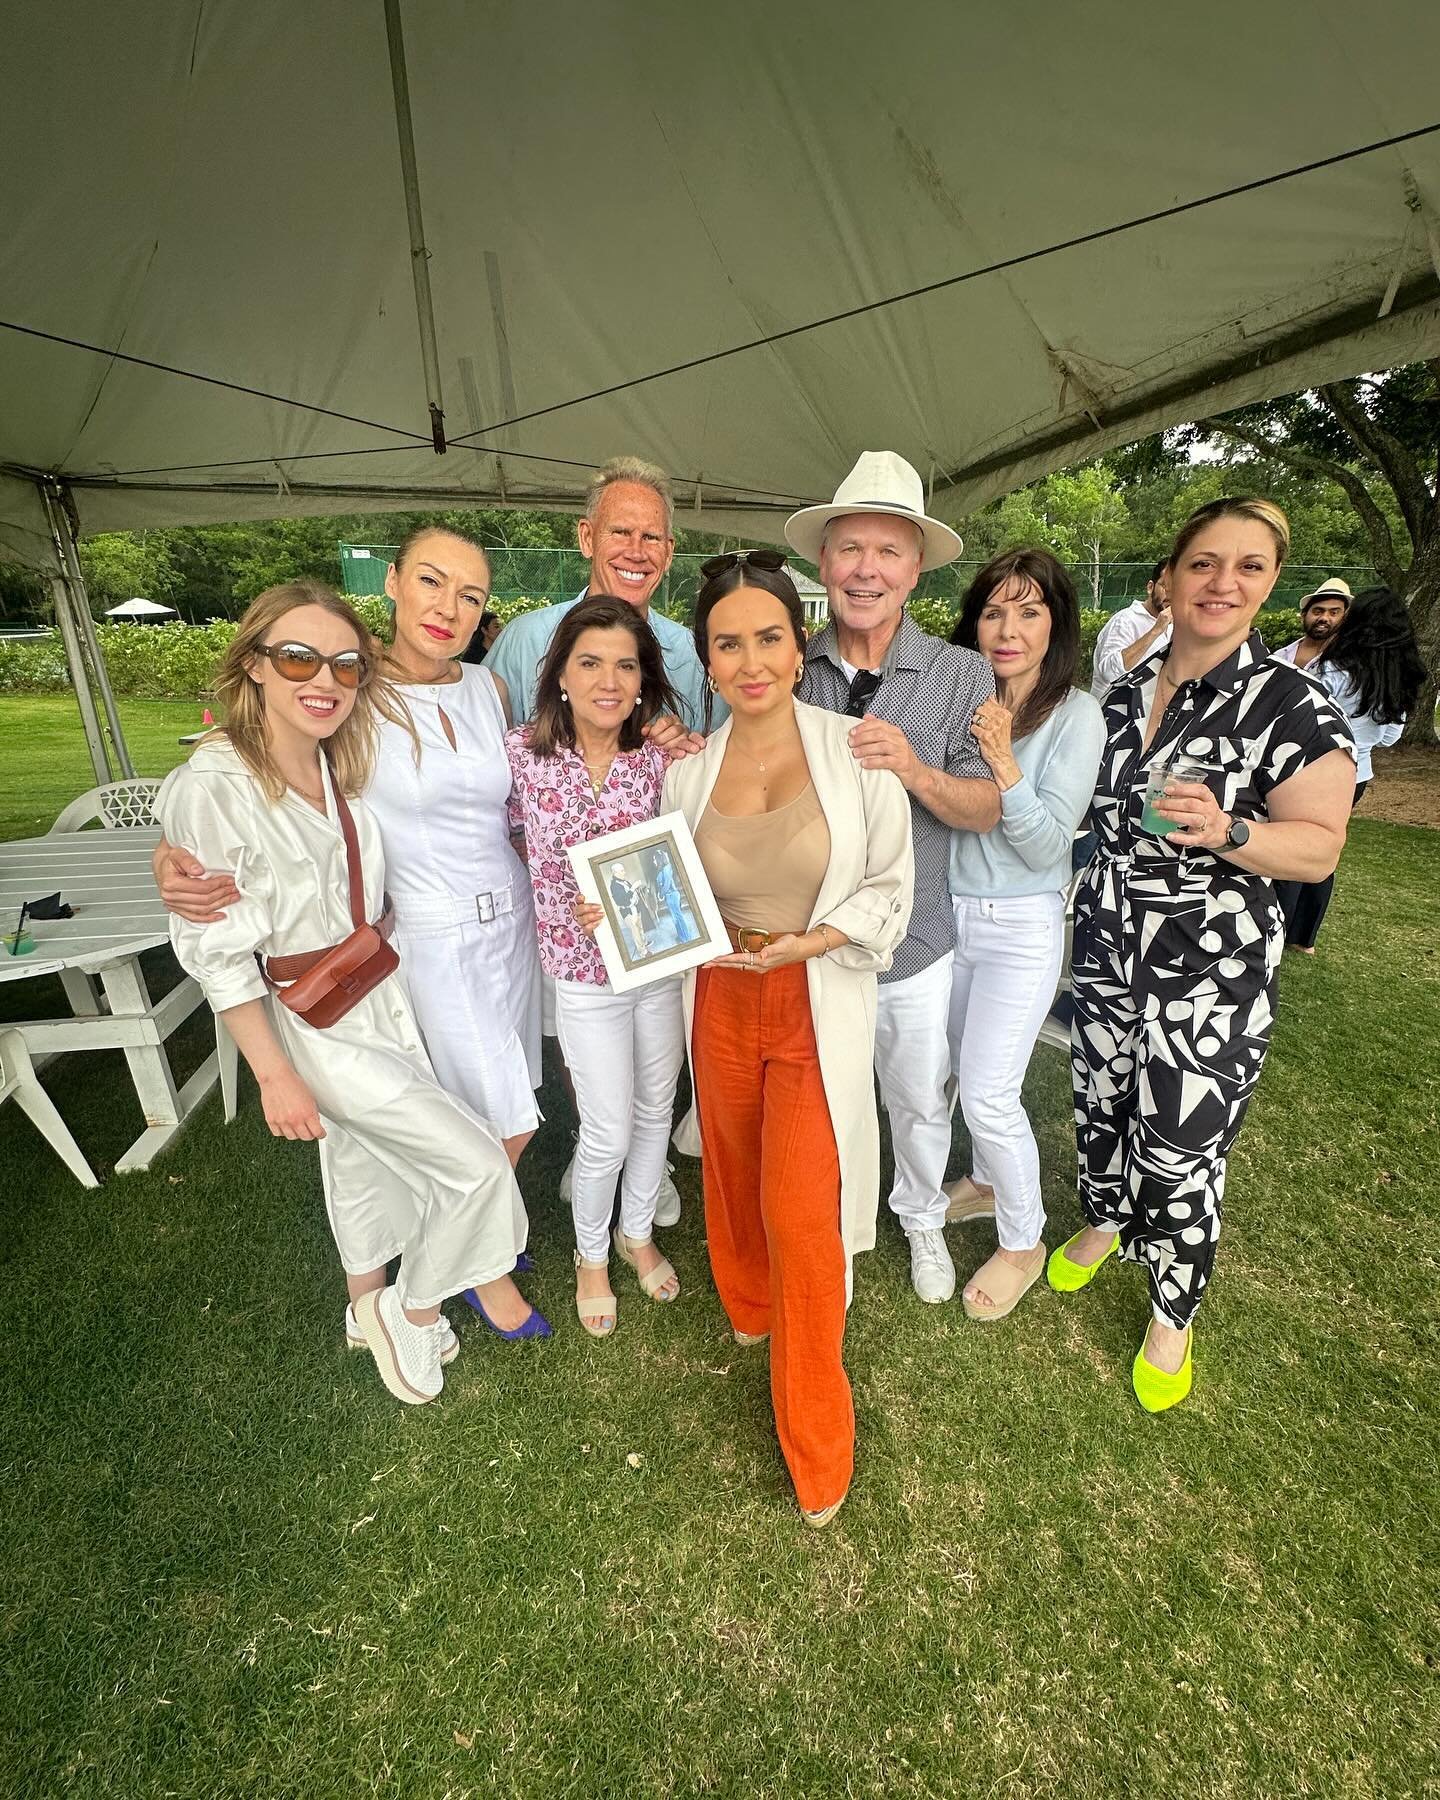 Cheers to a fabulous day at the Houston Polo Club, supporting @doshombres! Sipping on delicious mezcal cocktails and stomping divots made for the perfect blend of elegance and excitement.🐎🧡 #TeamPHCP #PoloDay #DosHombres